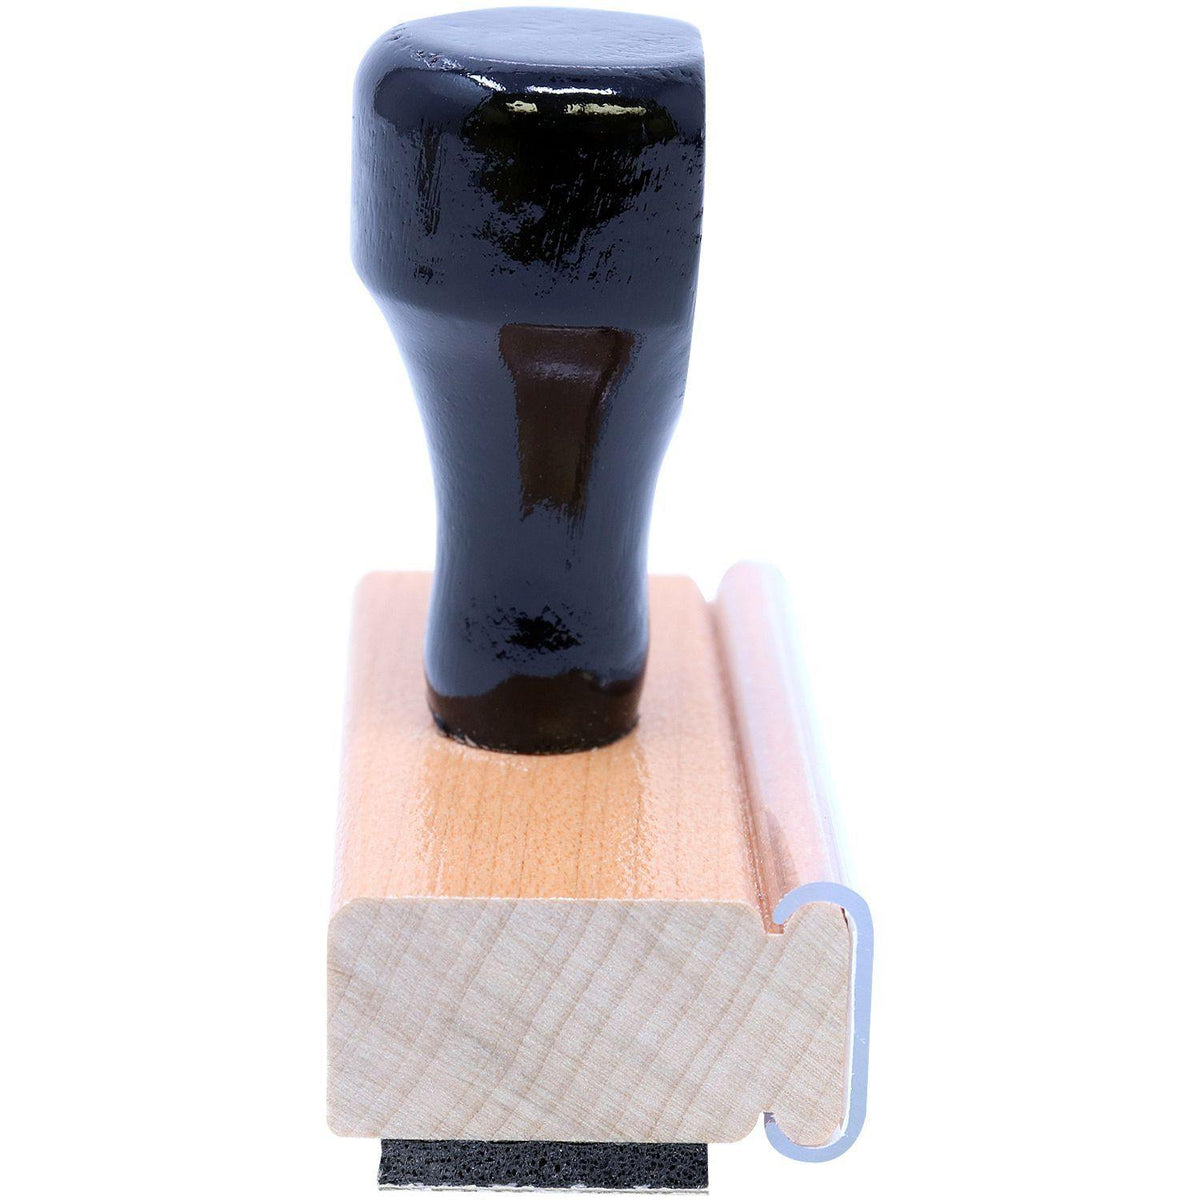 Large Strikeout Rubber Stamp - Engineer Seal Stamps - Brand_Acorn, Impression Size_Large, Stamp Type_Regular Stamp, Type of Use_General, Type of Use_Legal, Type of Use_Office